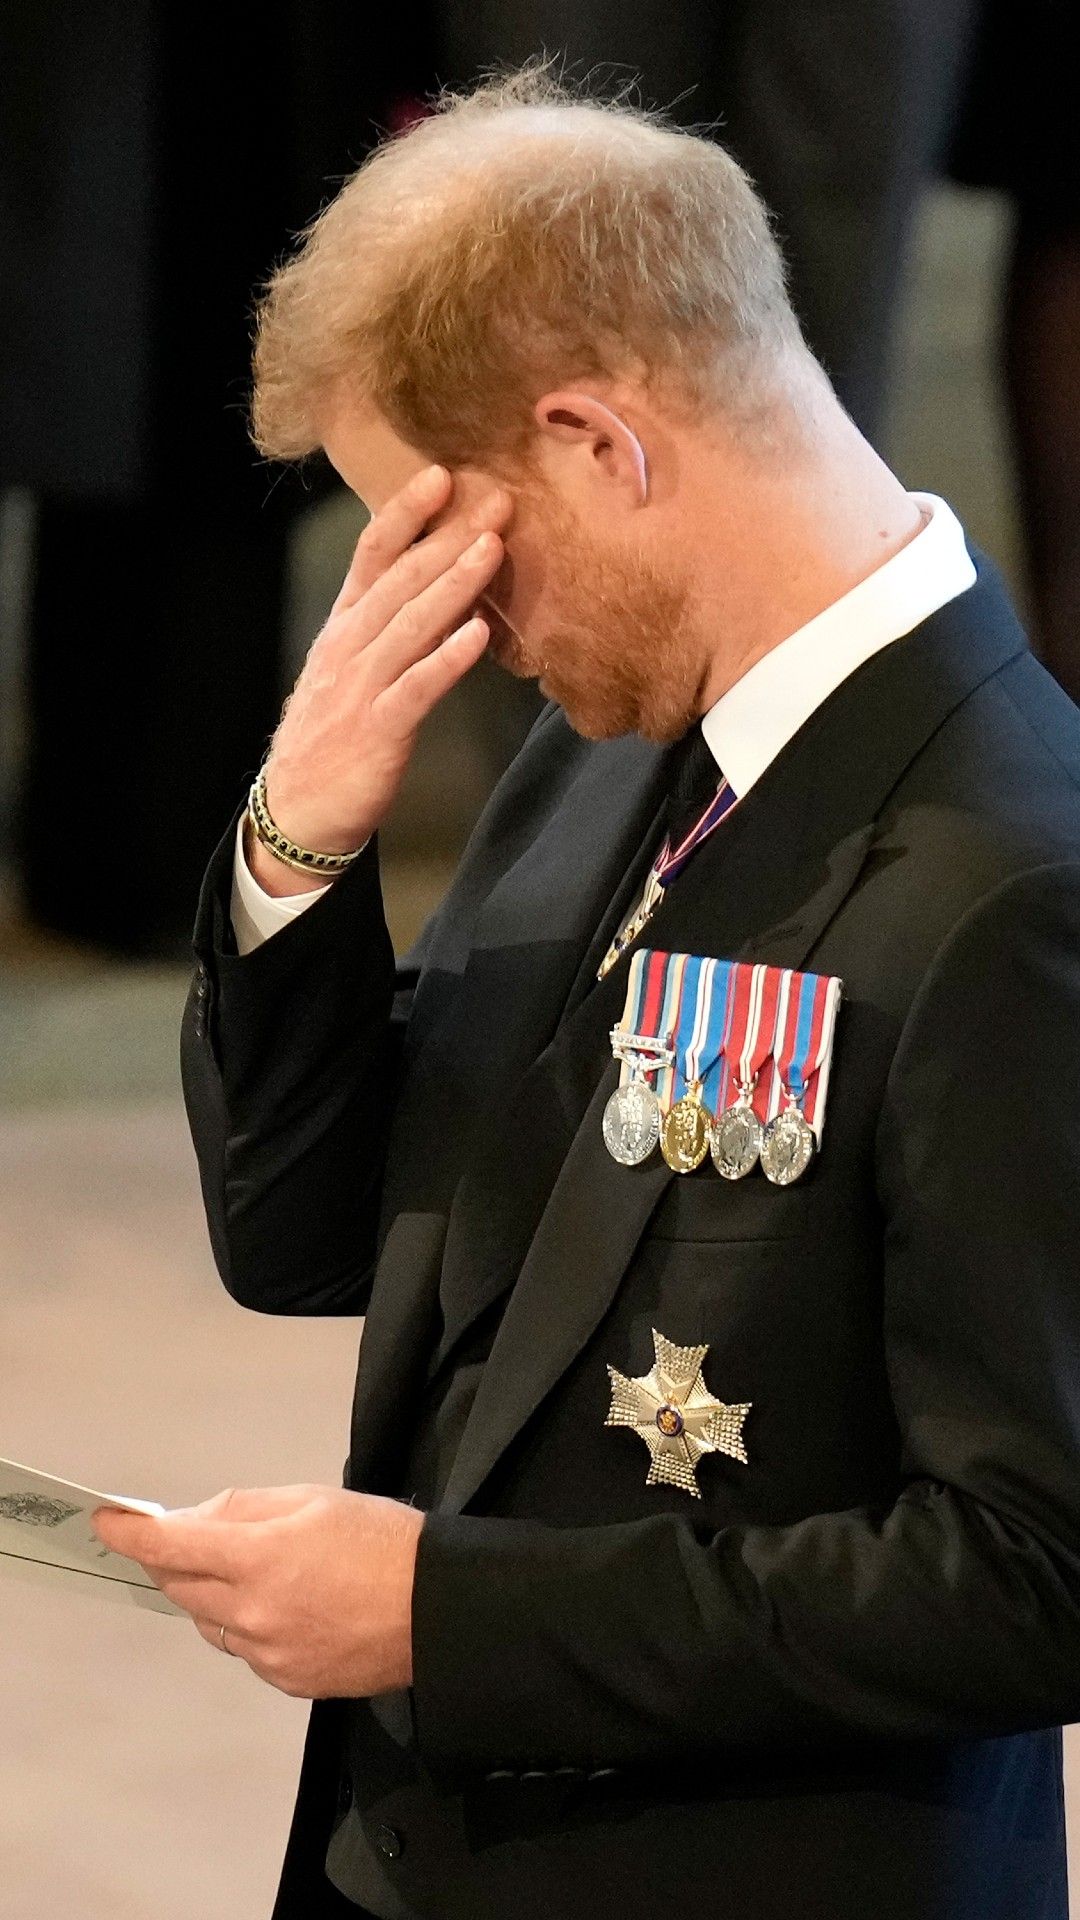 <p>                     <strong>"We all have mental health in the same way that we all have physical health. It’s OK to have depression, it’s OK to have anxiety, it’s OK to have adjustment disorder."</strong>                   </p>                                      <p>                     Prince Harry is one of the leading figures in encouraging people to challenge the taboo and stigma surrounding mental health issues and has previously spoken about his own battles and <a href="https://www.womanandhome.com/life/royal-news/prince-harry-opens-up-about-unresolved-grief-in-an-emotional-speech-on-mental-health/">'unresolved grief'</a>. He hopes by speaking out, others won't miss out on getting the help they need and taking the first step toward recovery.                   </p>